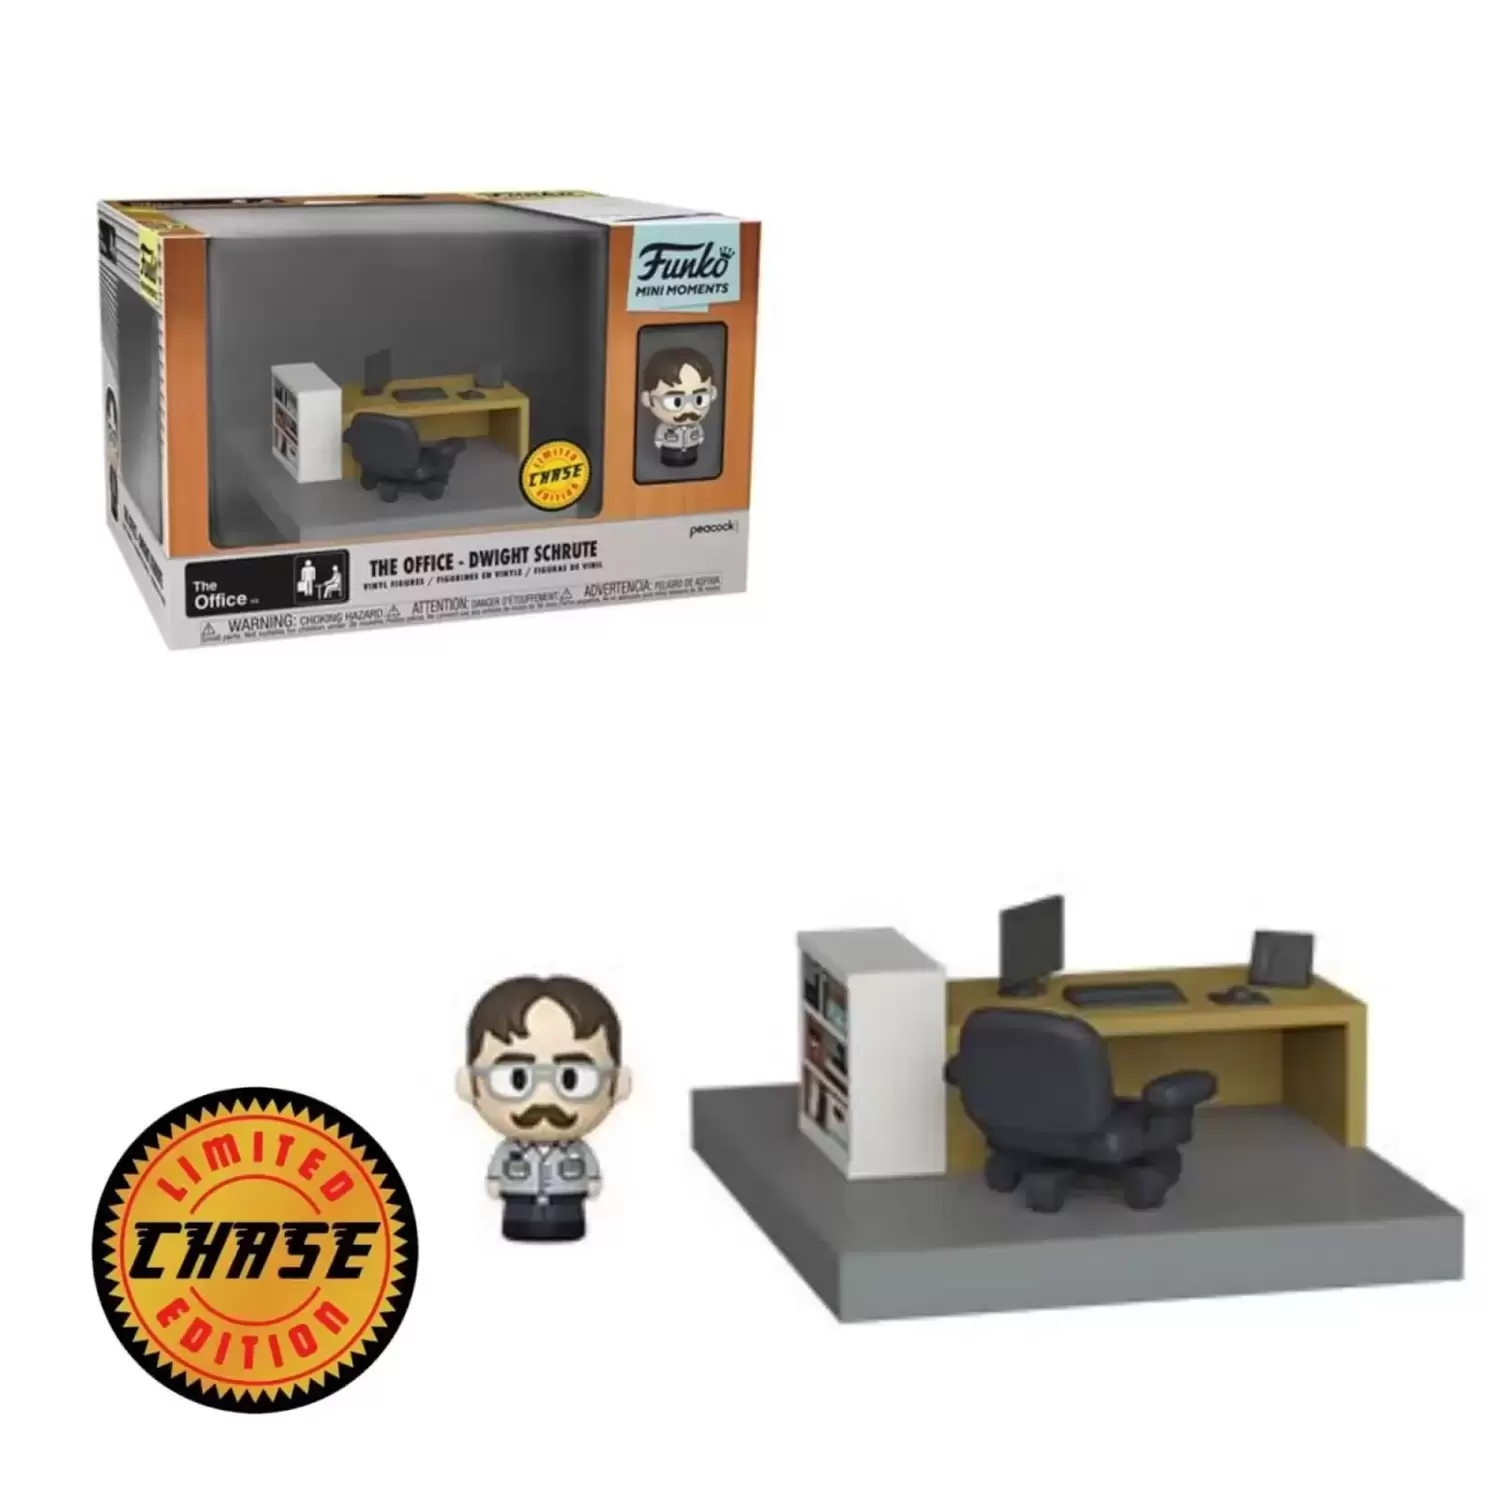 Funko Mini Moments - The Office - Dwight Schrute (Chase)